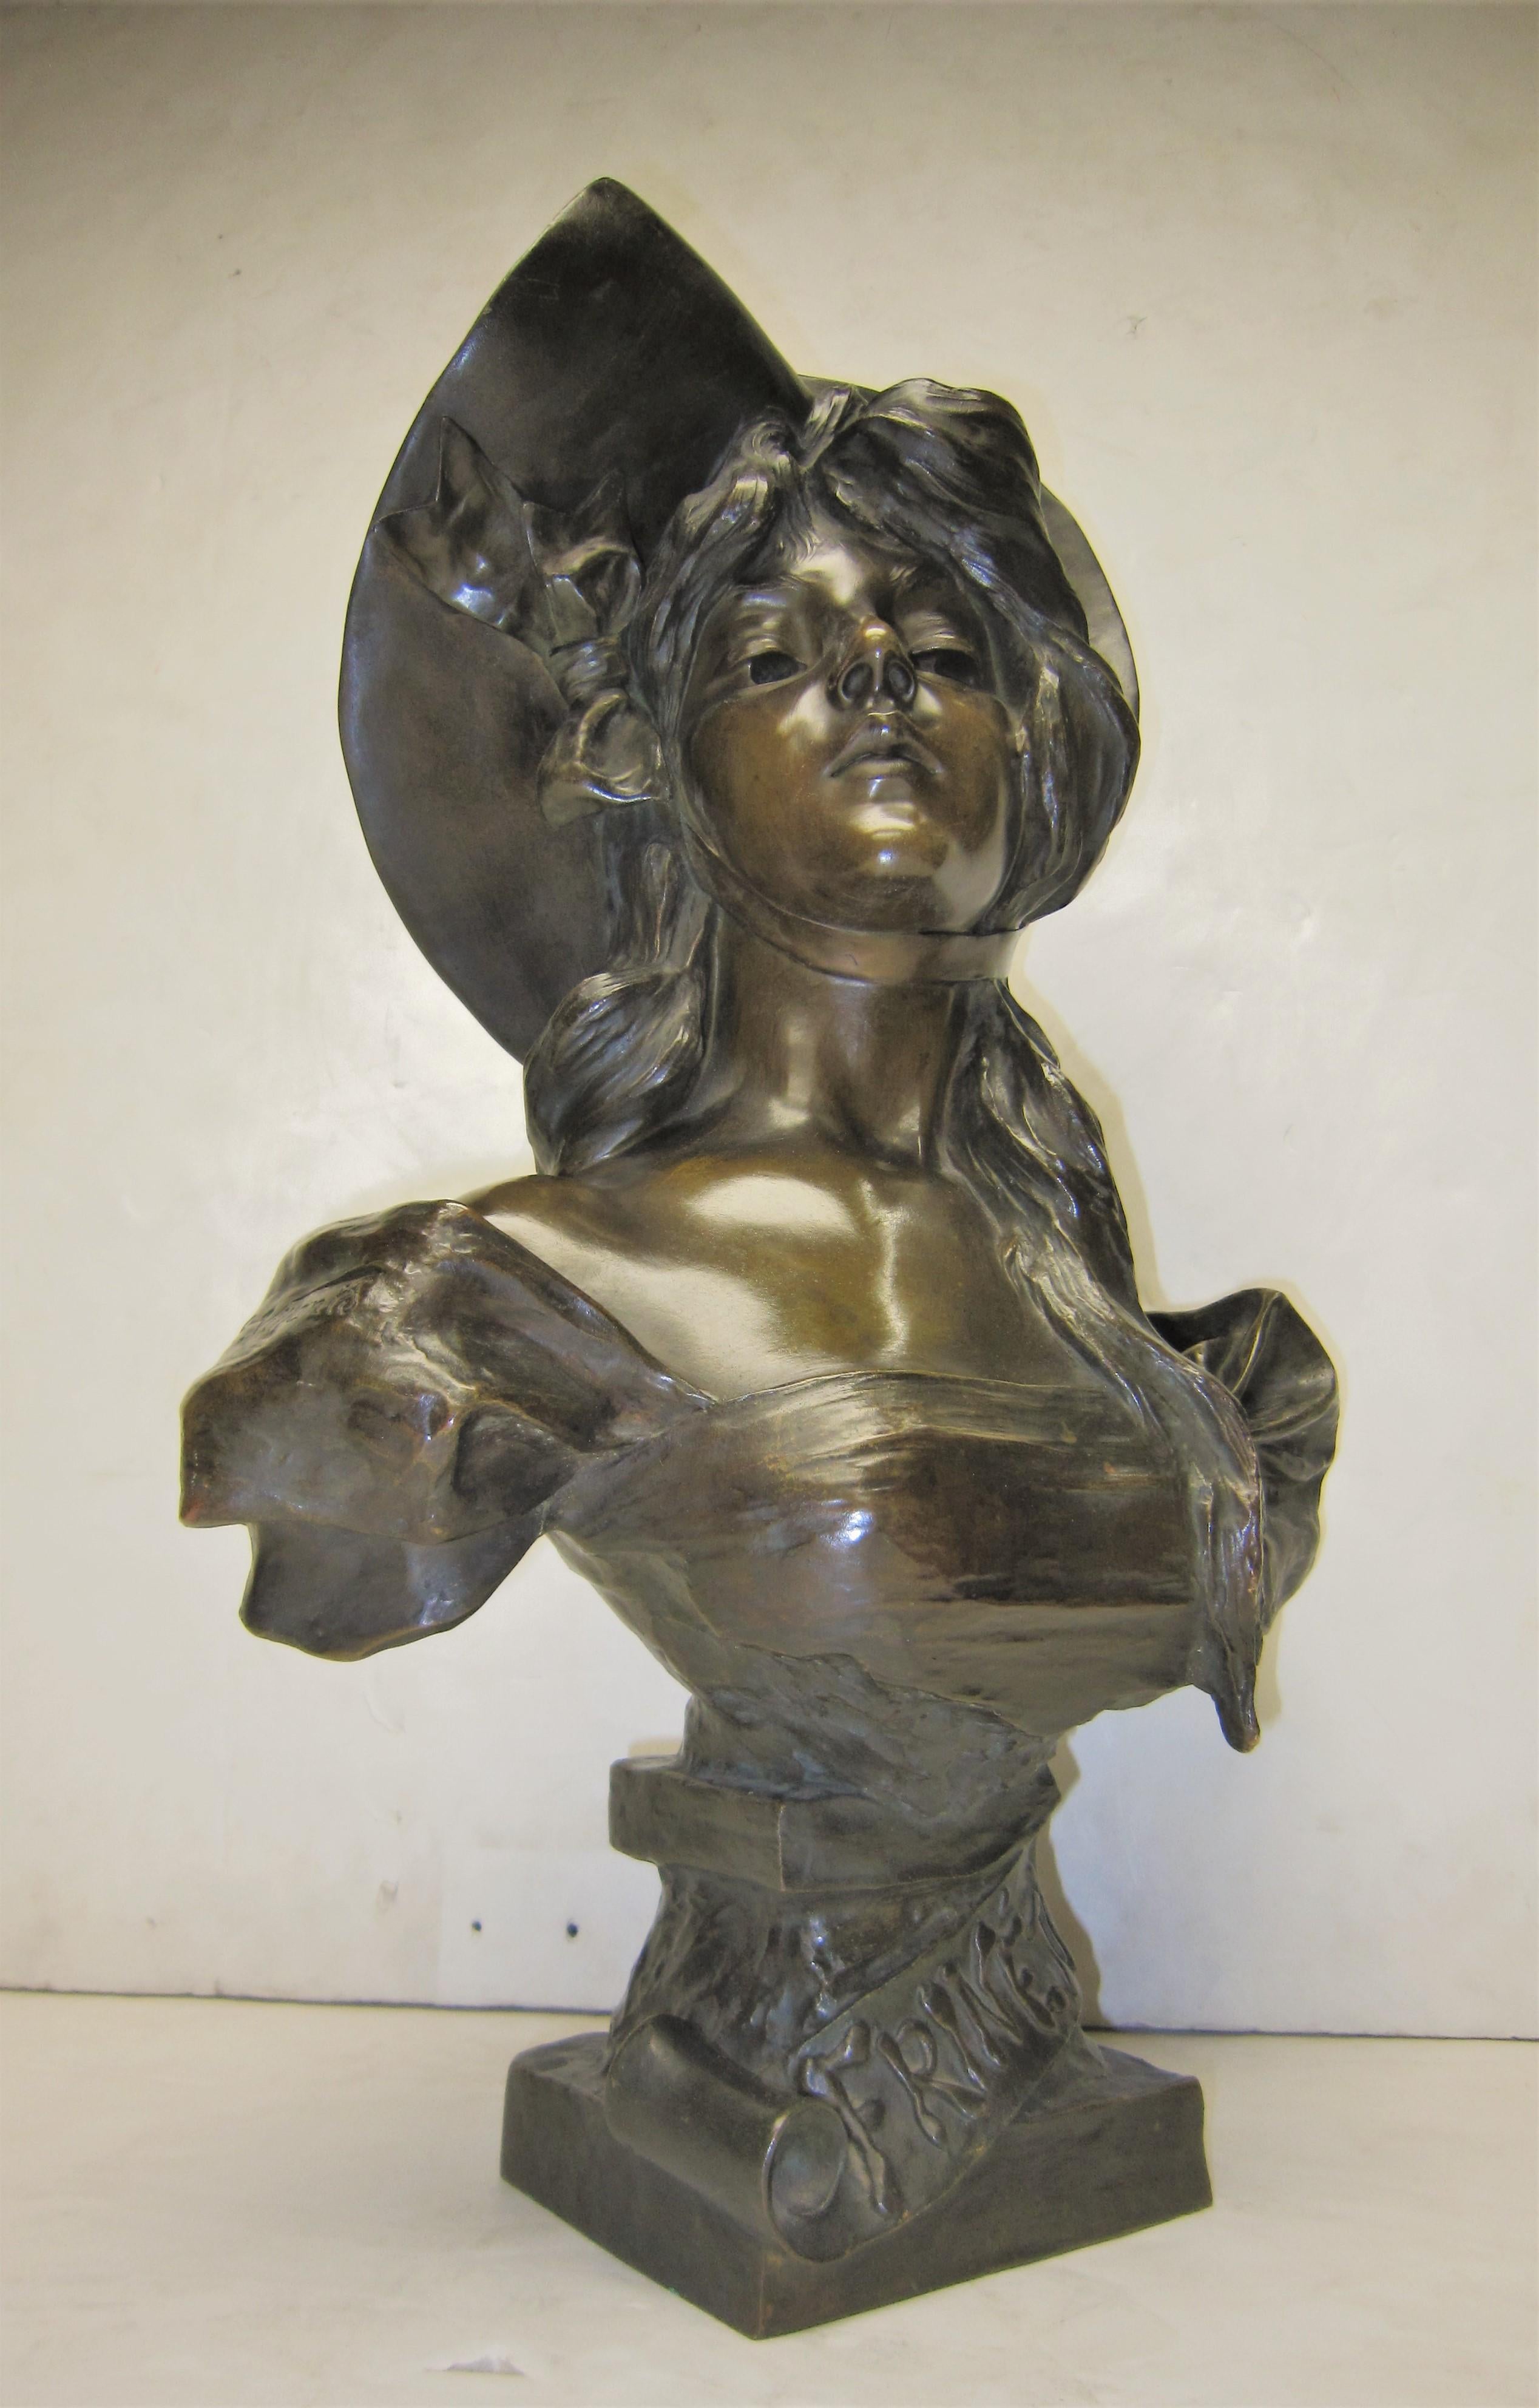 French late 19th-early 20th century highly decorative polychrome bronze statue of a young woman with chiseled features wearing a low bodice.
The Art Nouveau bust entitled “Frinette” was sculpted by Emmanuel Villanis from a live model.
Villanis, a